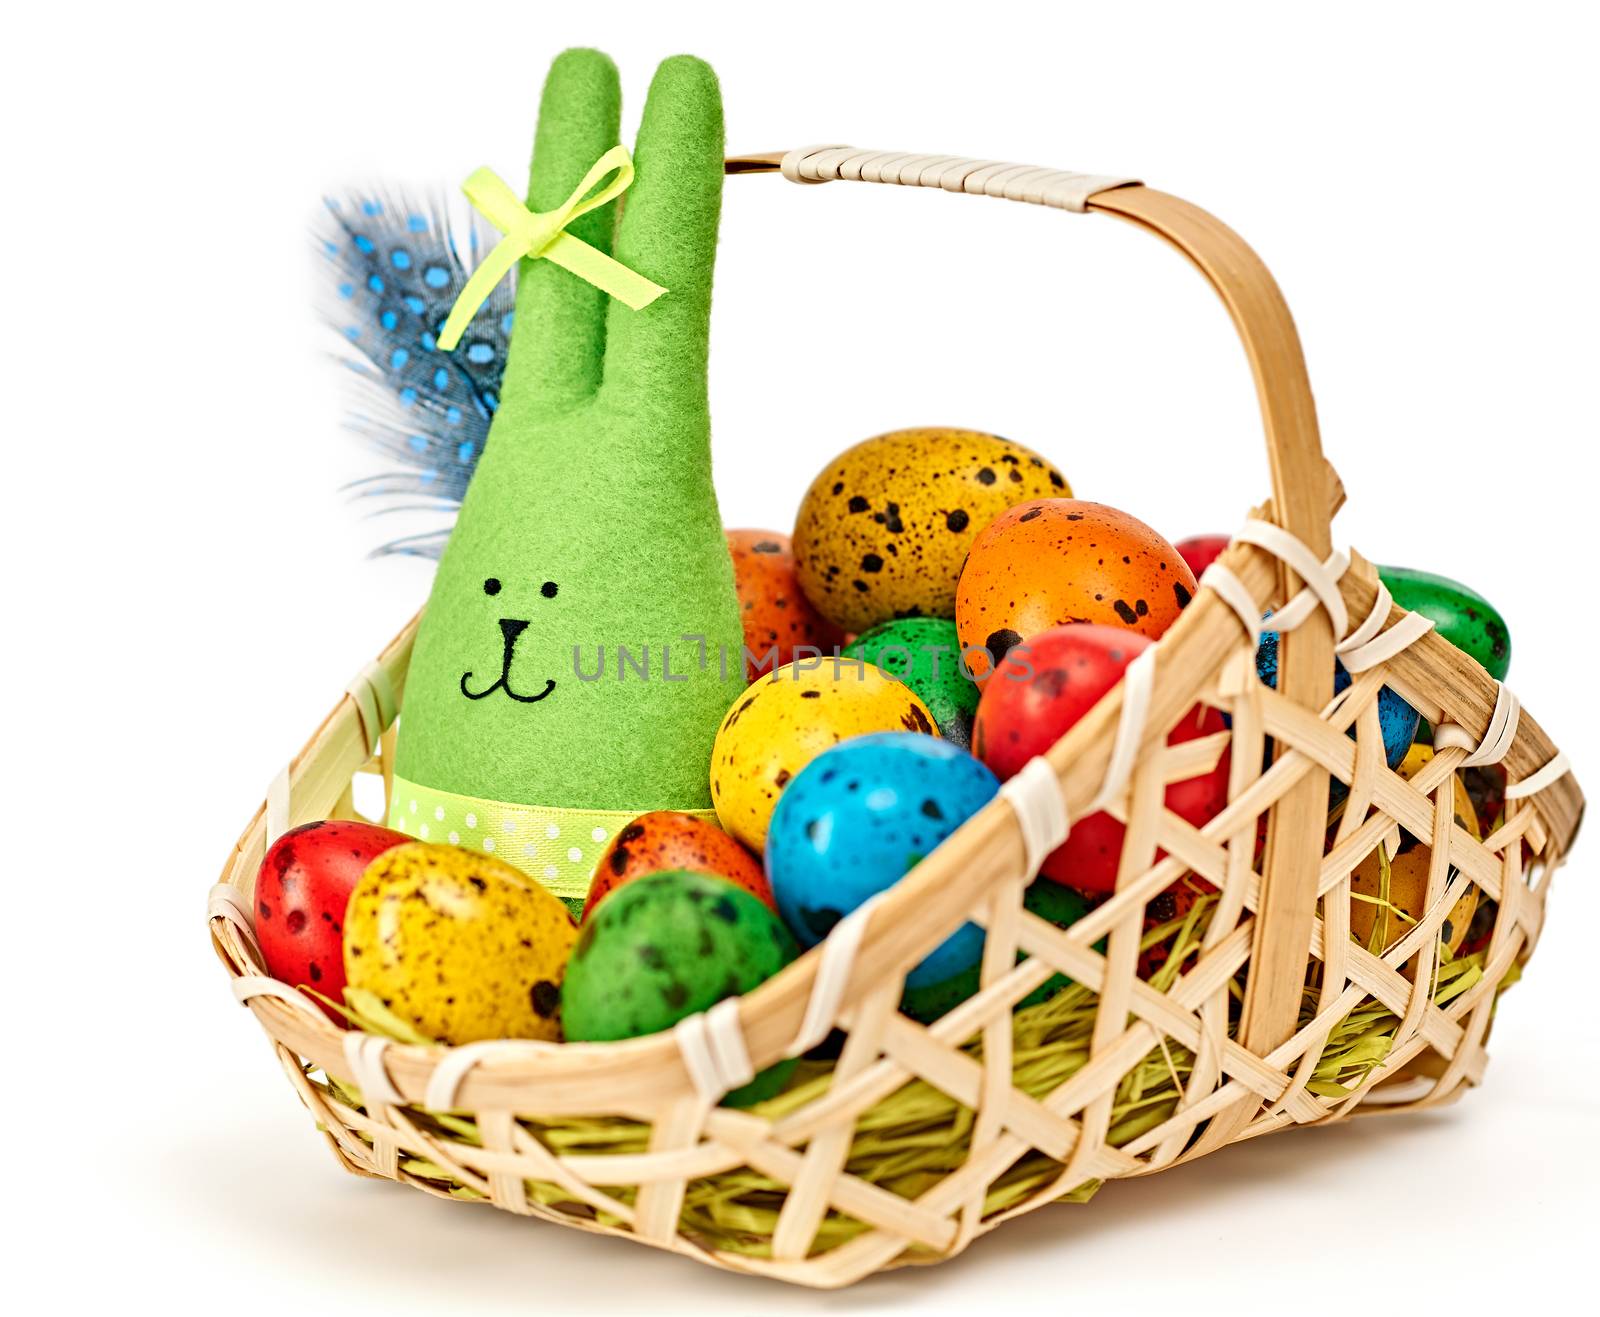 Easter rabbit and eggs in basket. Happy bunny handmade and hand painted multicolored quail eggs with straw and feathers, on white background. Unusual creative holiday greeting card 